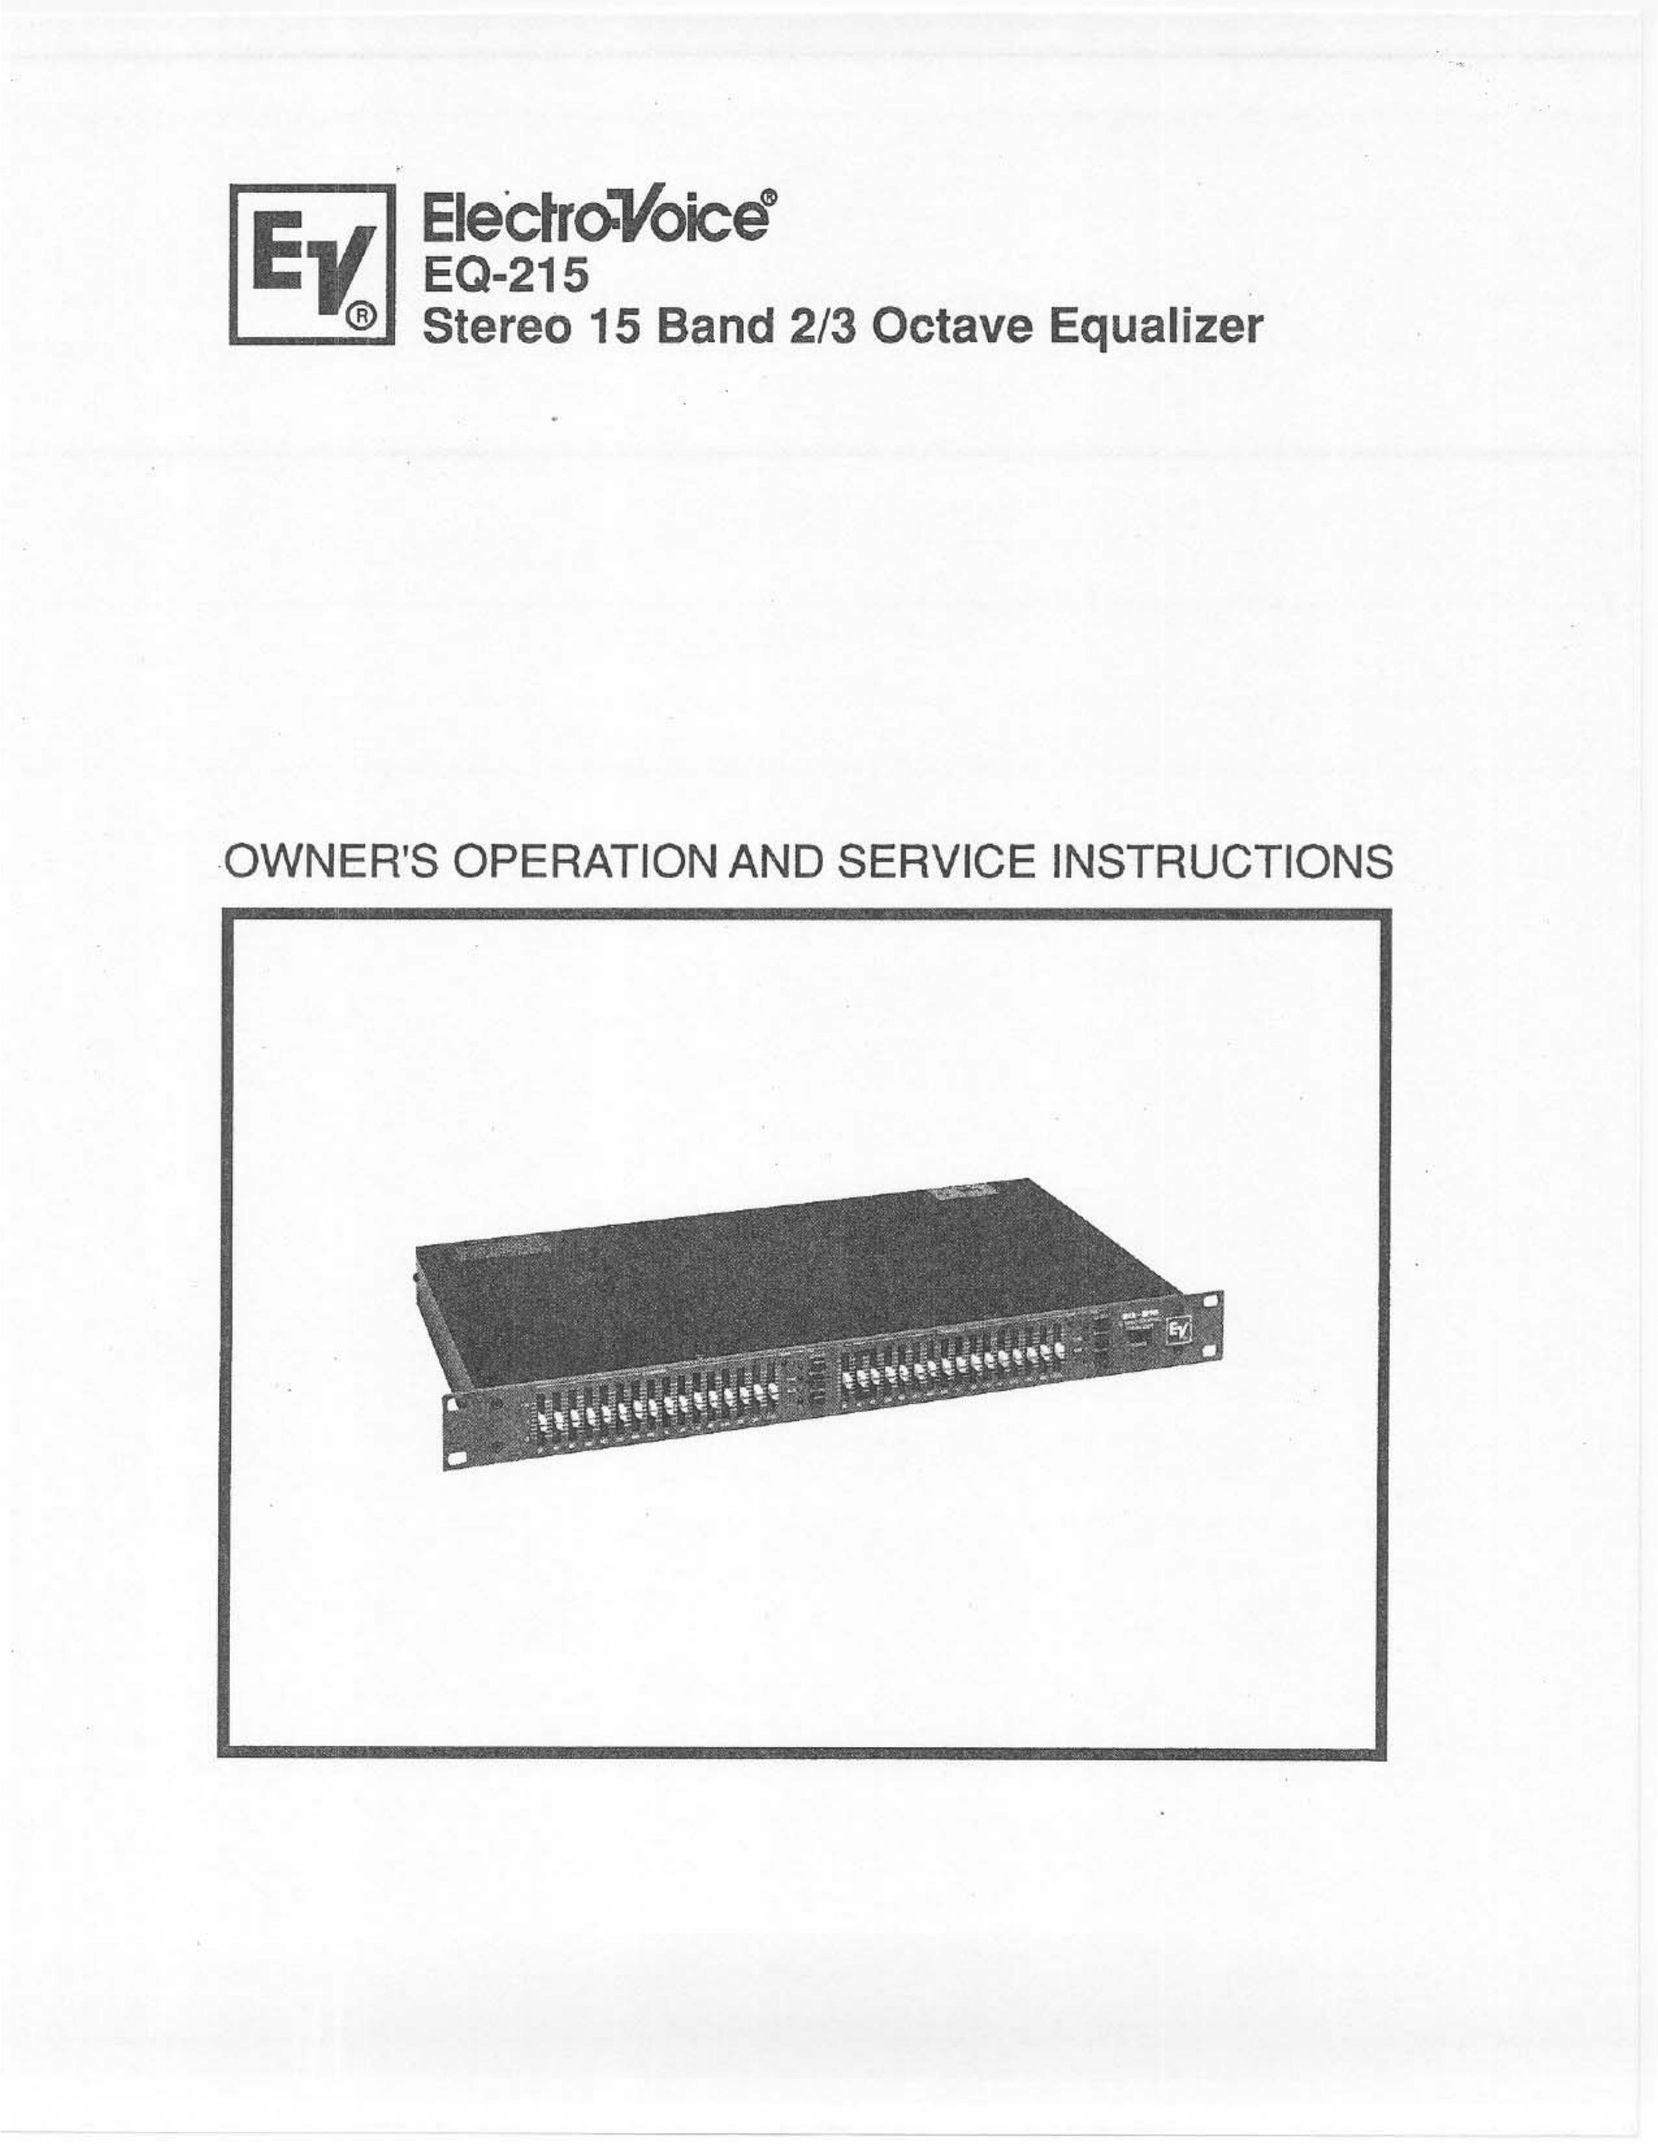 Electro-Voice EQ-215 Stereo Equalizer User Manual